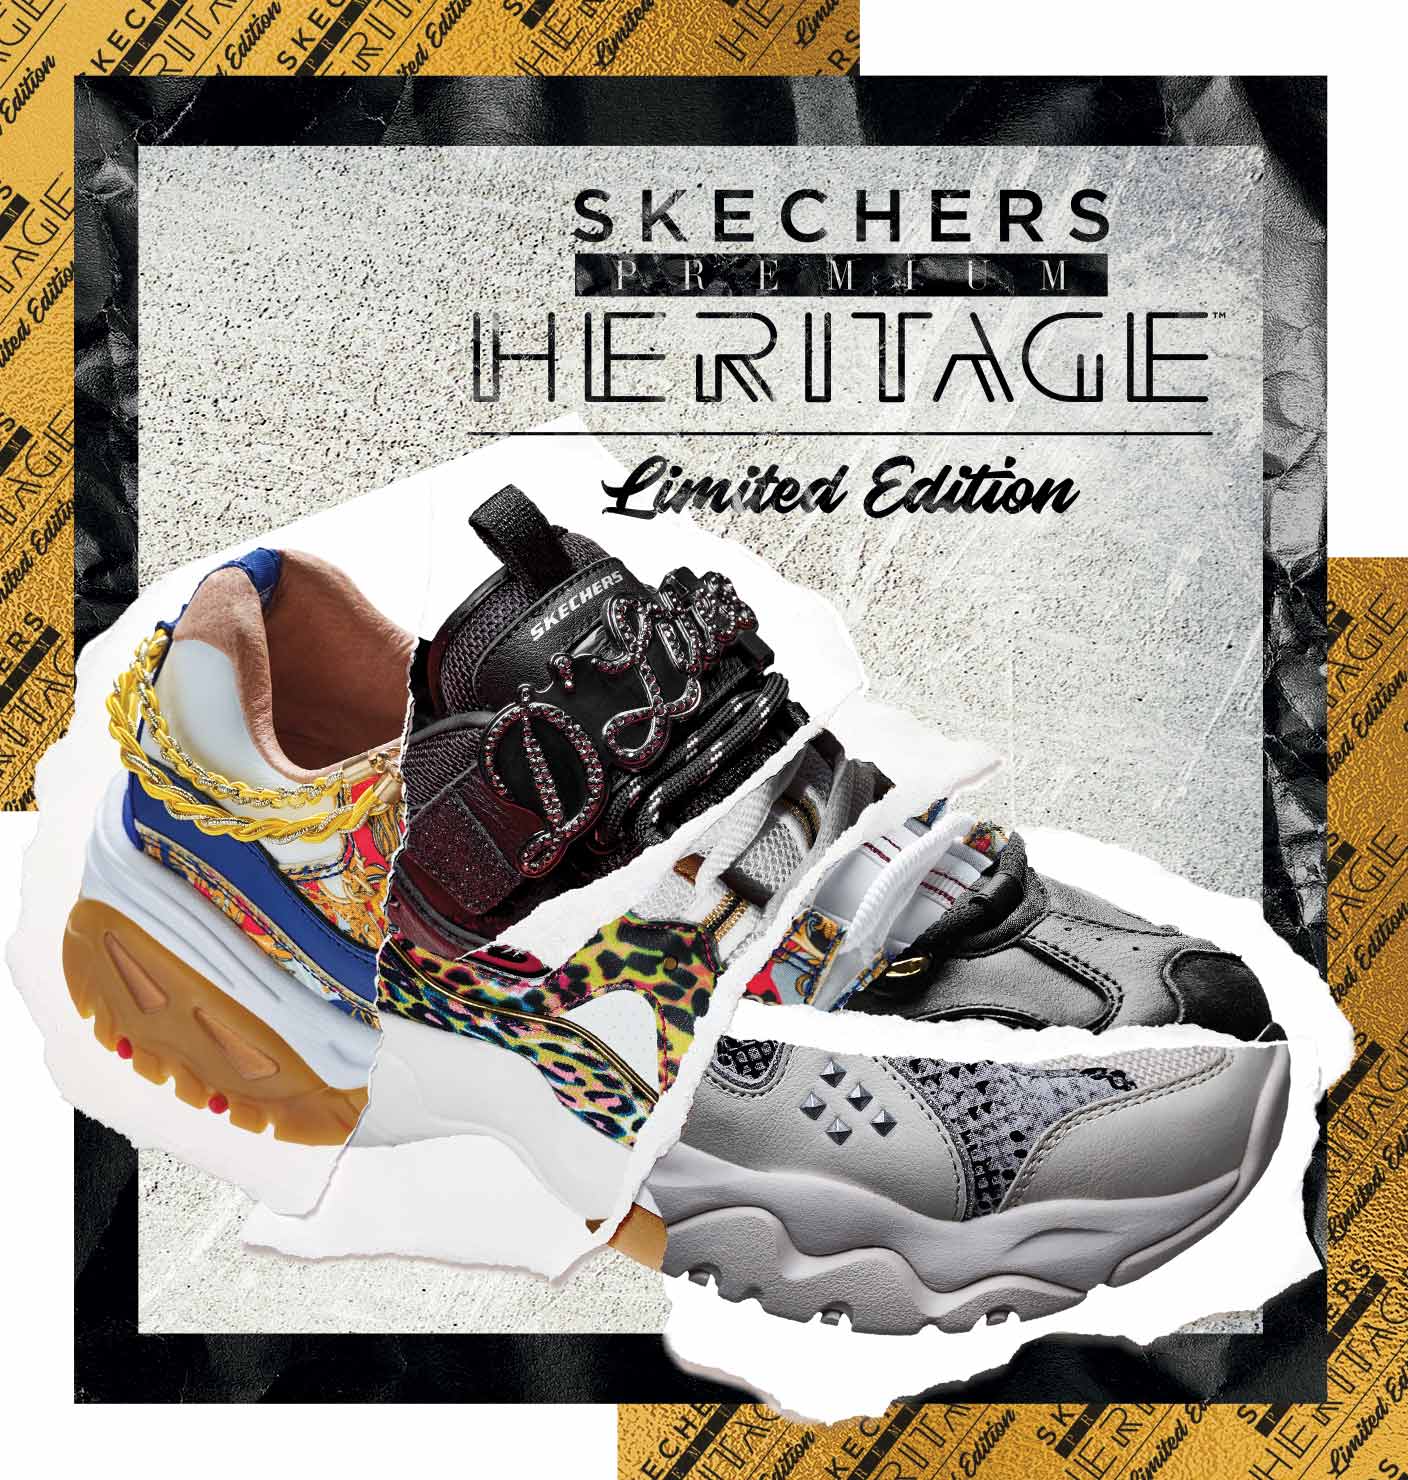 skechers new collection 2018